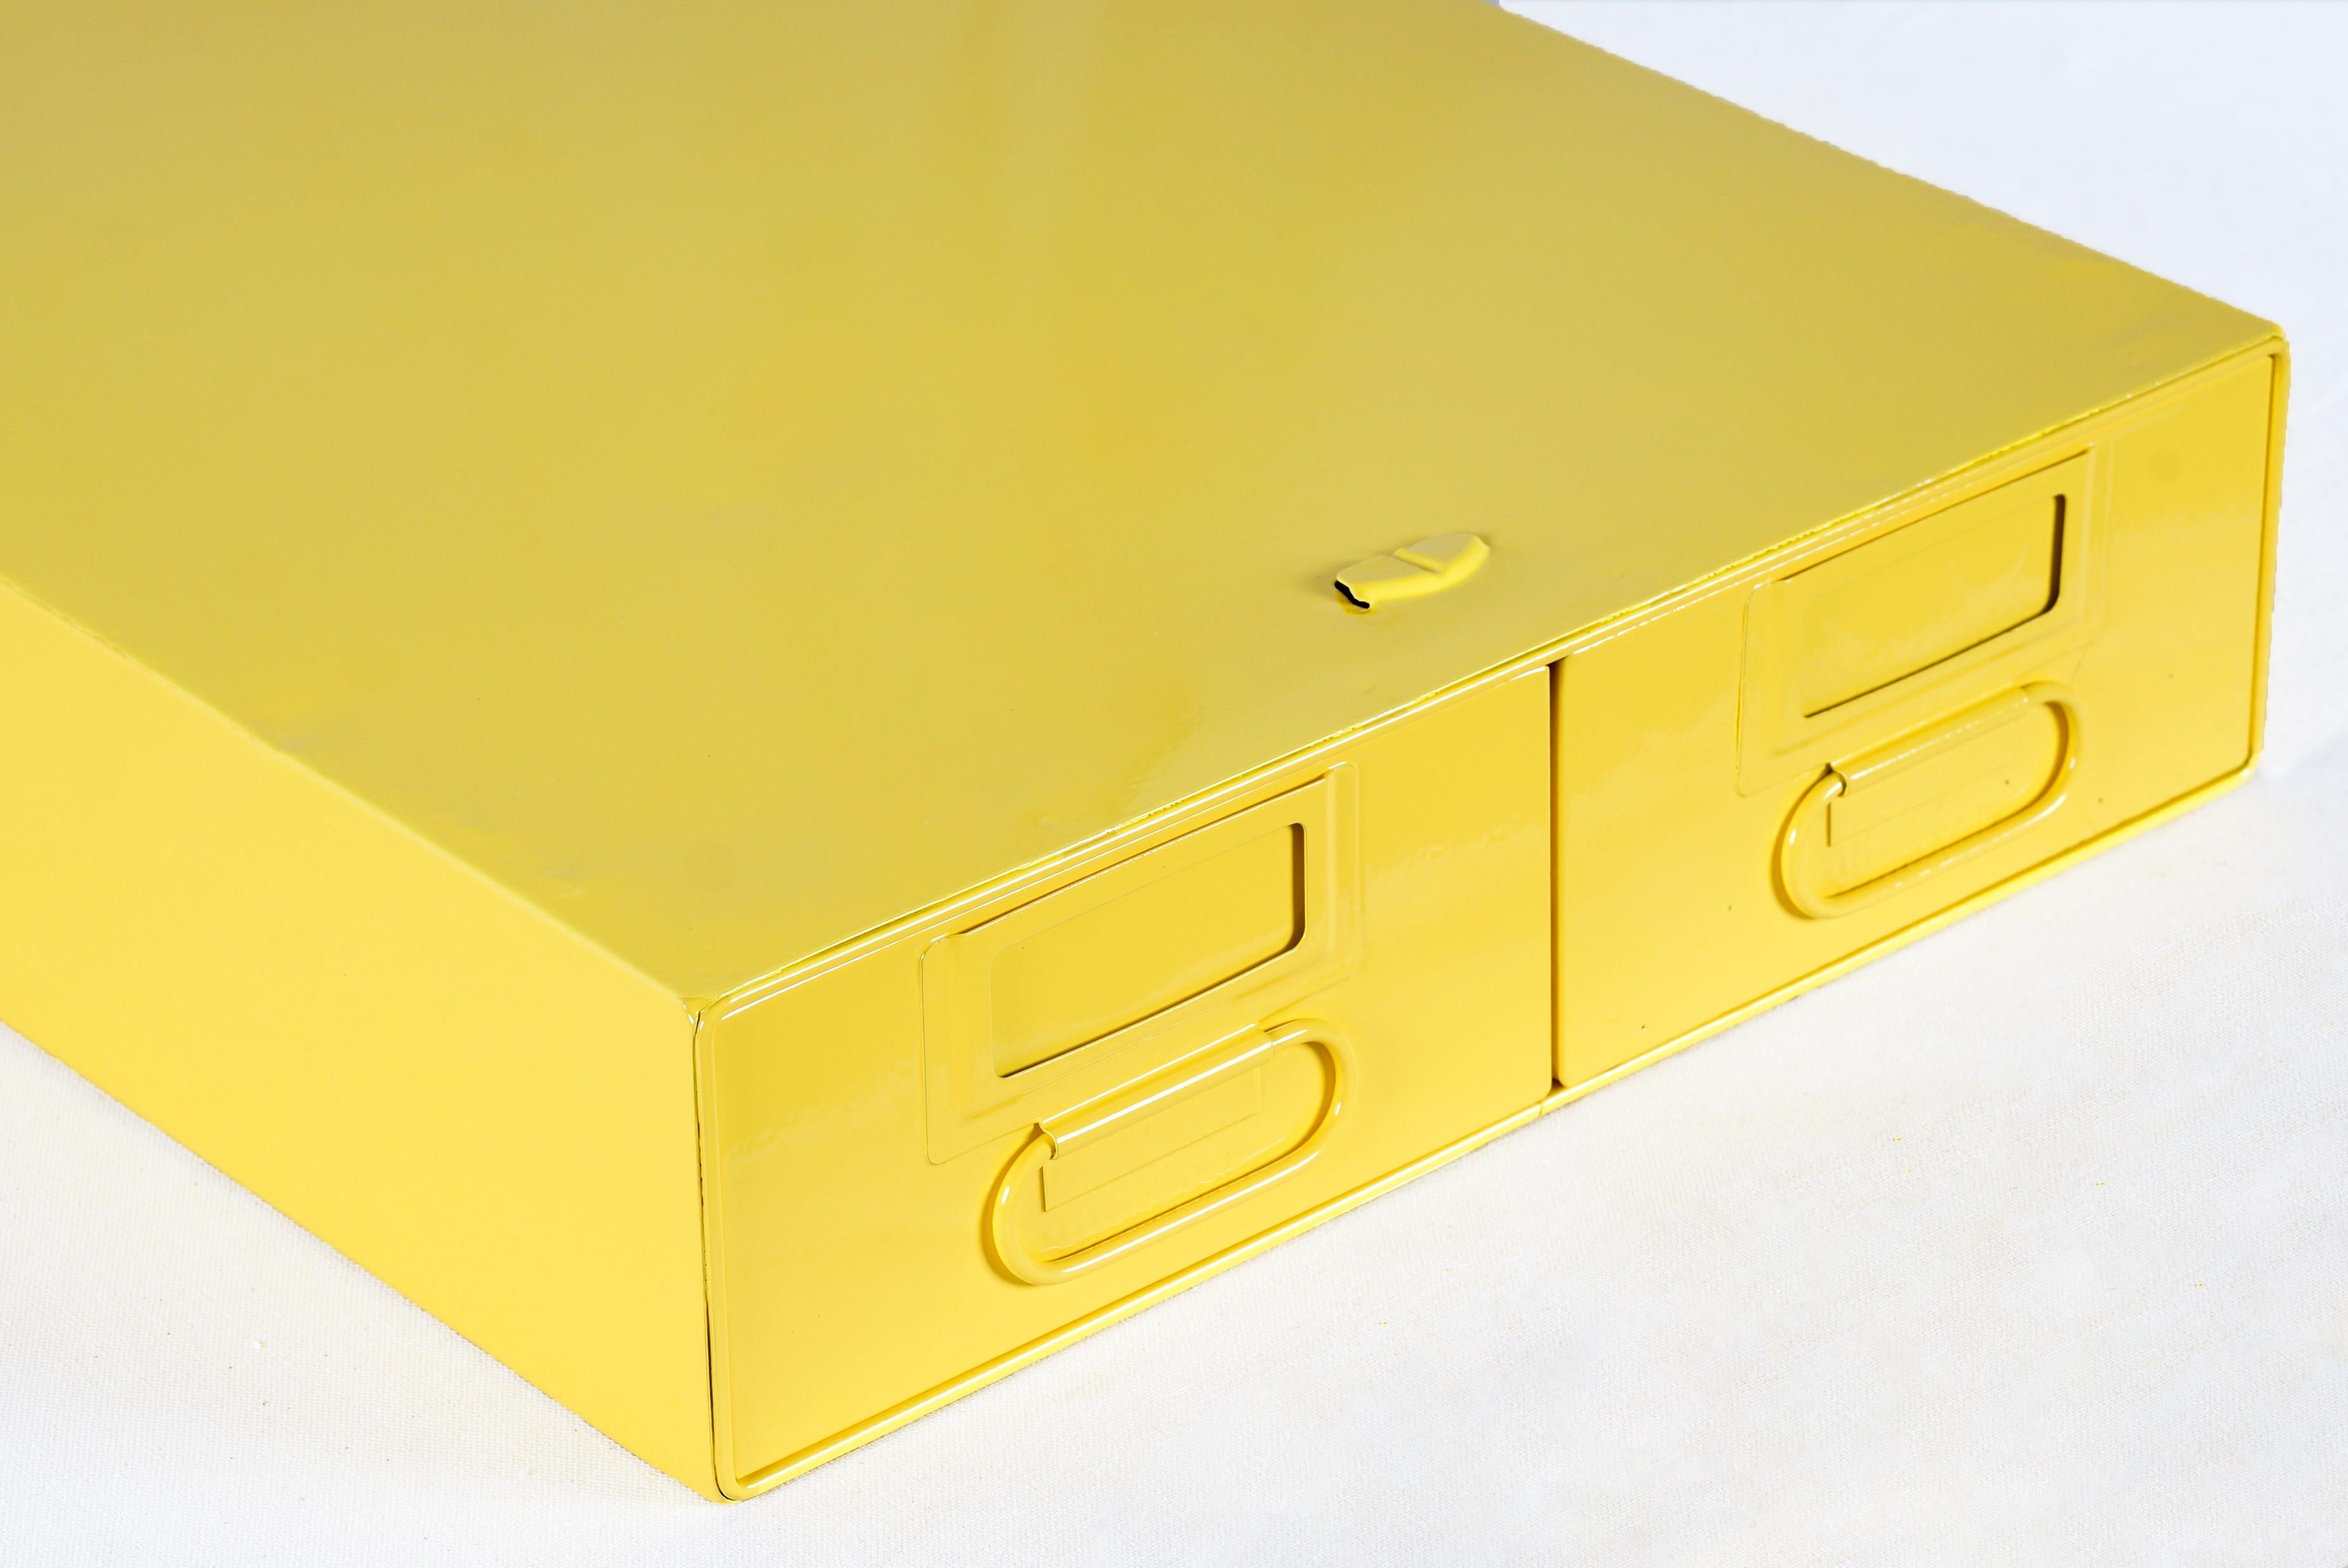 Mid-Century Modern 1940s Card Catalog File Drawers, Refinished in Gloss Yellow